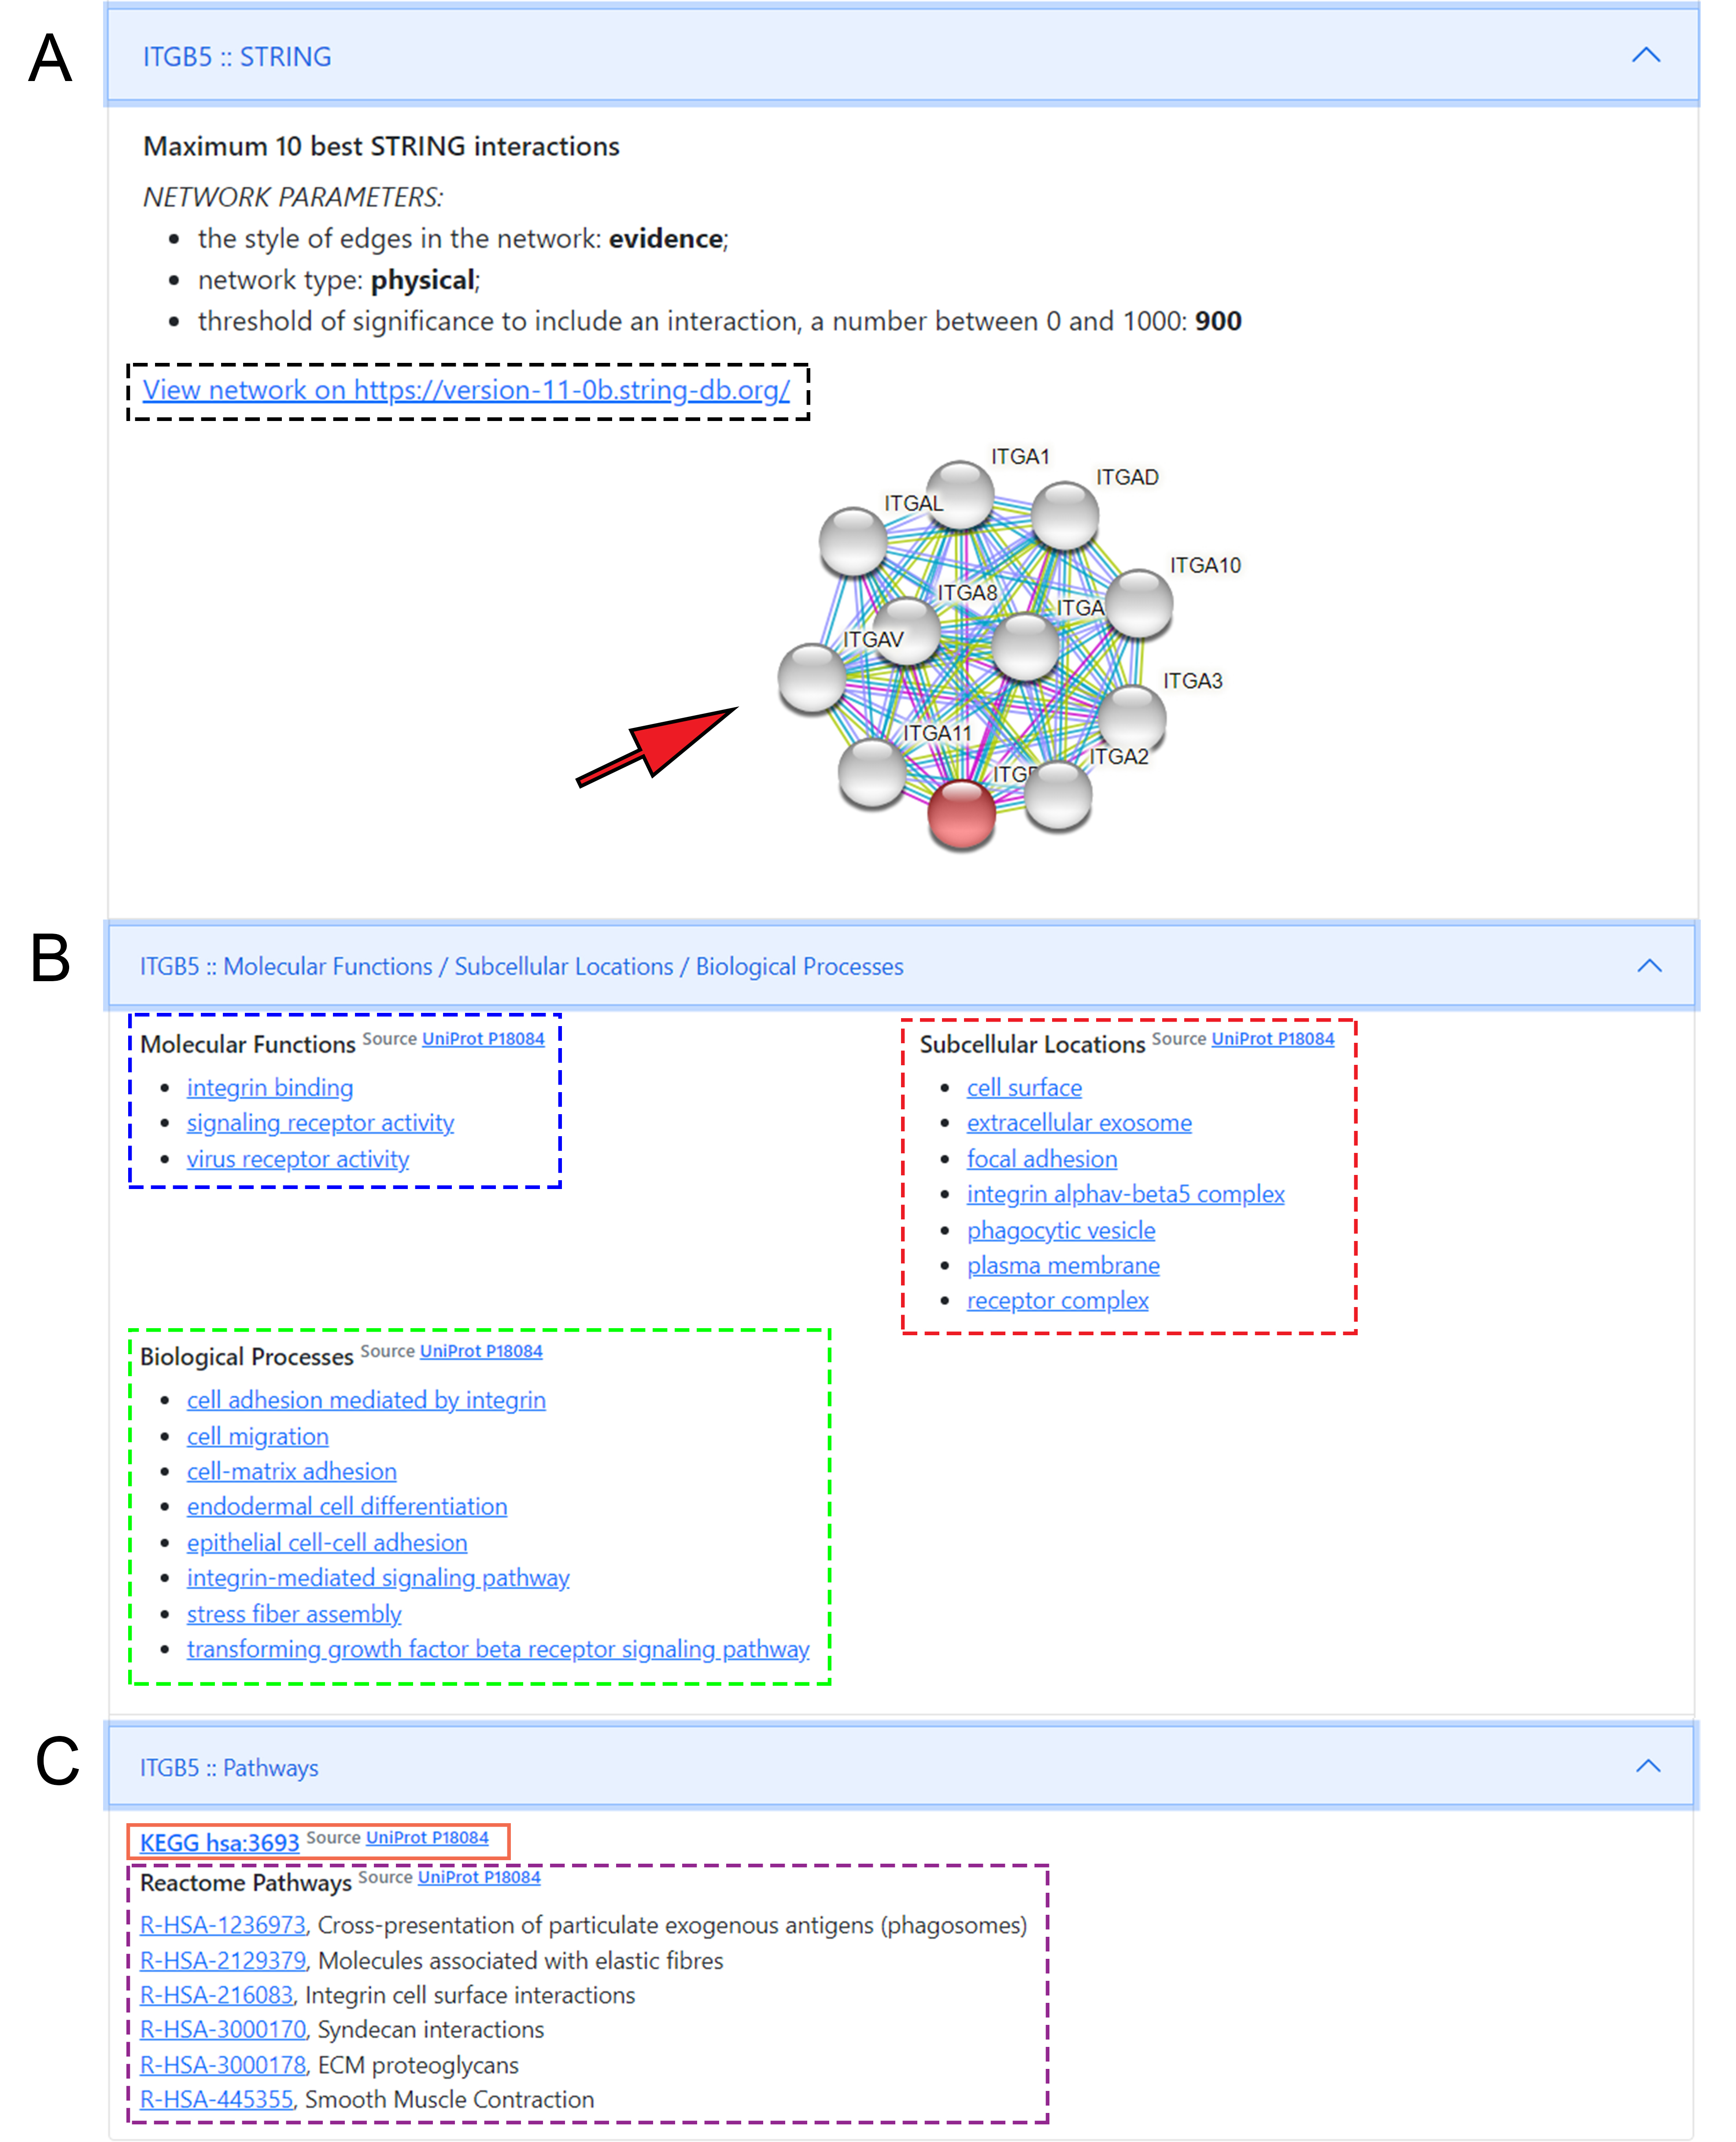 Molecular background of druggable targets - Details on the molecular background of druggable targets: Panel A shows the network map from STRING with static string map and hyperlink to STRING DB entry. Panel B displays hyperlinks to “molecular function”, “biological processes” and “subcellular localisation” to browse the UniProt database on molecular background. By clicking directly on the titles, we can access a specific function. Panel C shows hyperlinks to visualize KEGG and Reactome pathways of the selected target. For Reactome, clicking on individual pathway titles we can directly access the infographic of the given pathway.